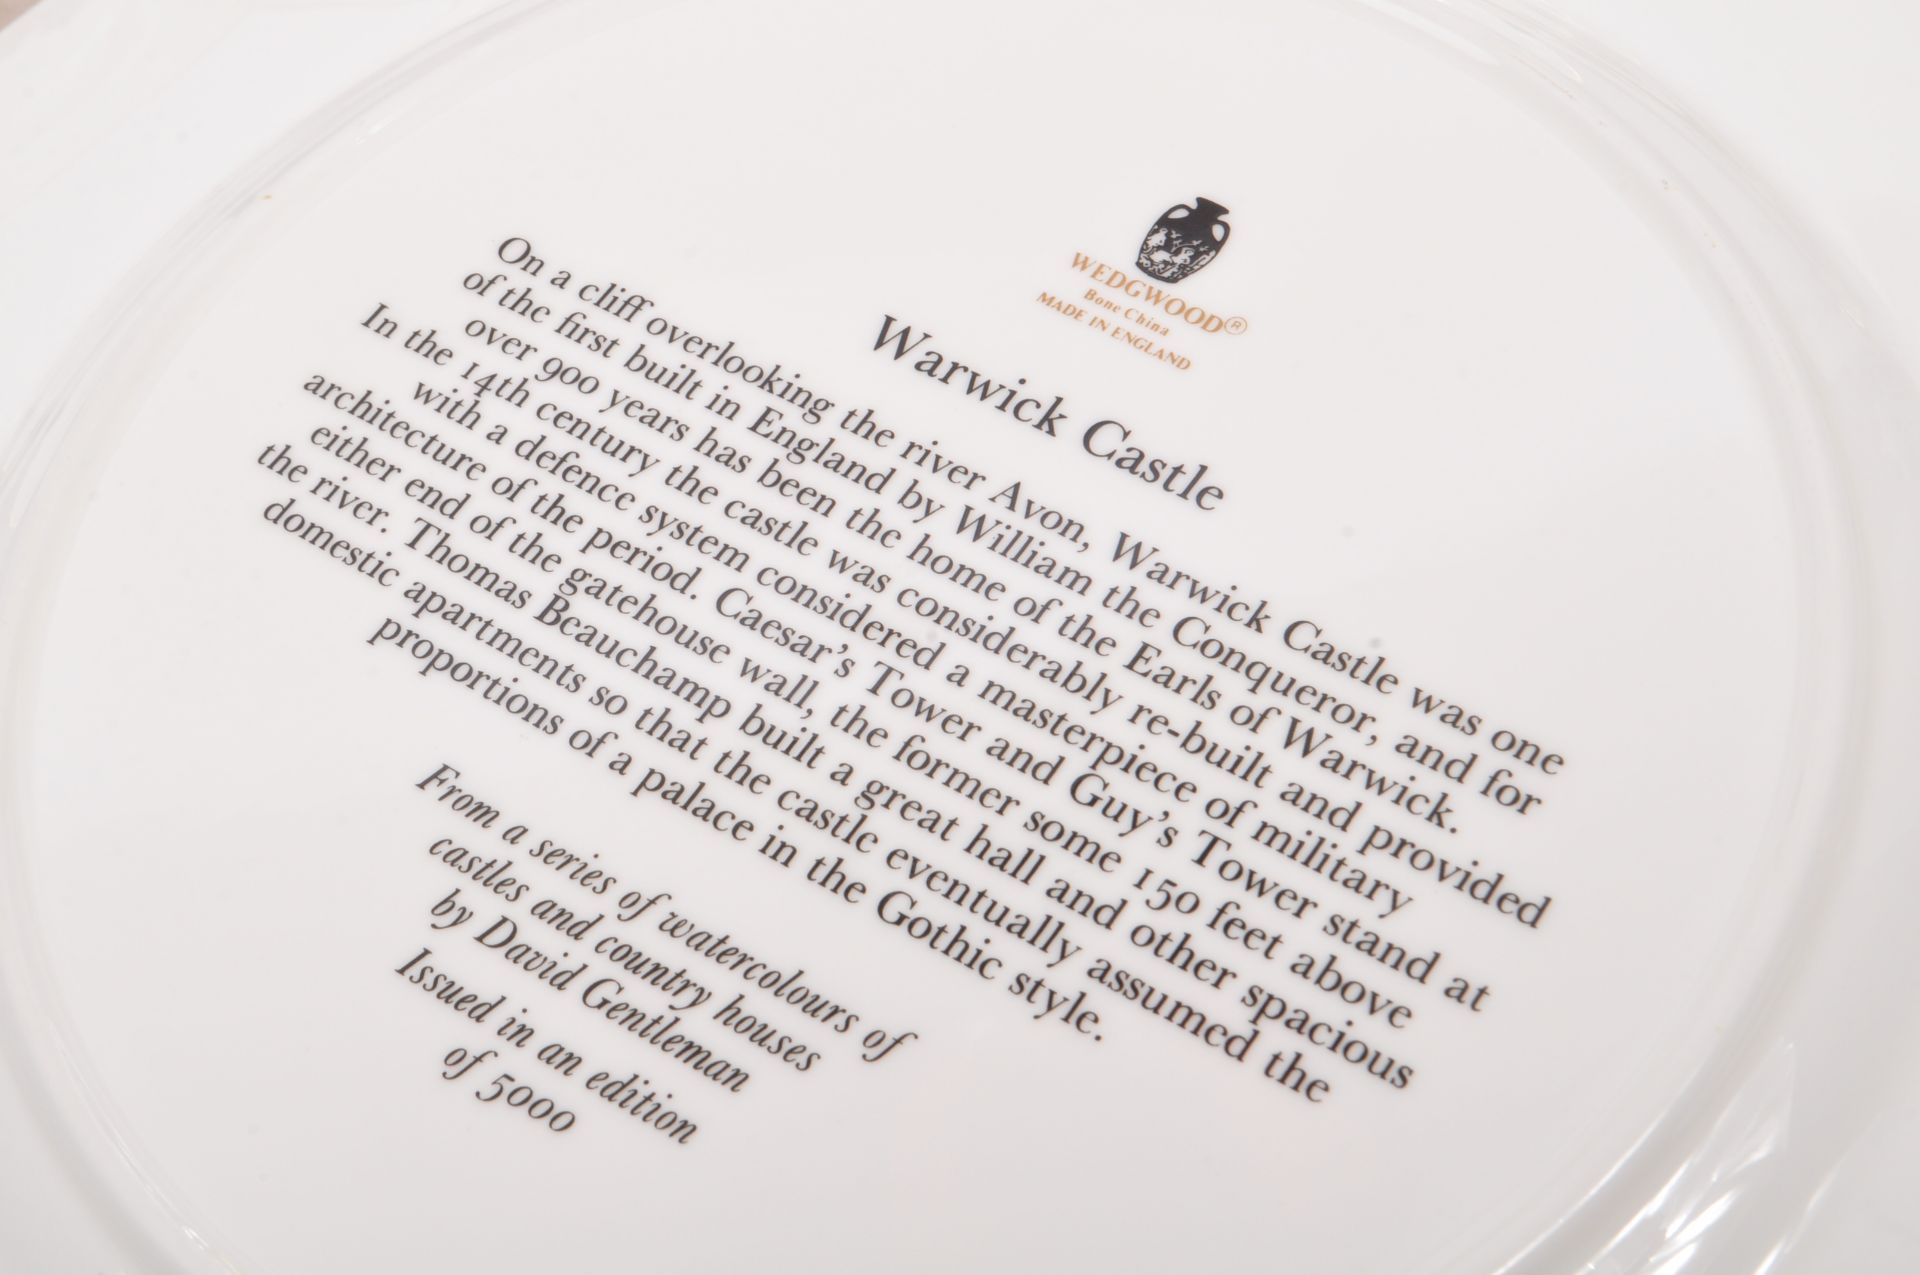 WEDGWOOD - CASTLE & COUNTRY HOUSE PORCELAIN PLATES - Image 11 of 11